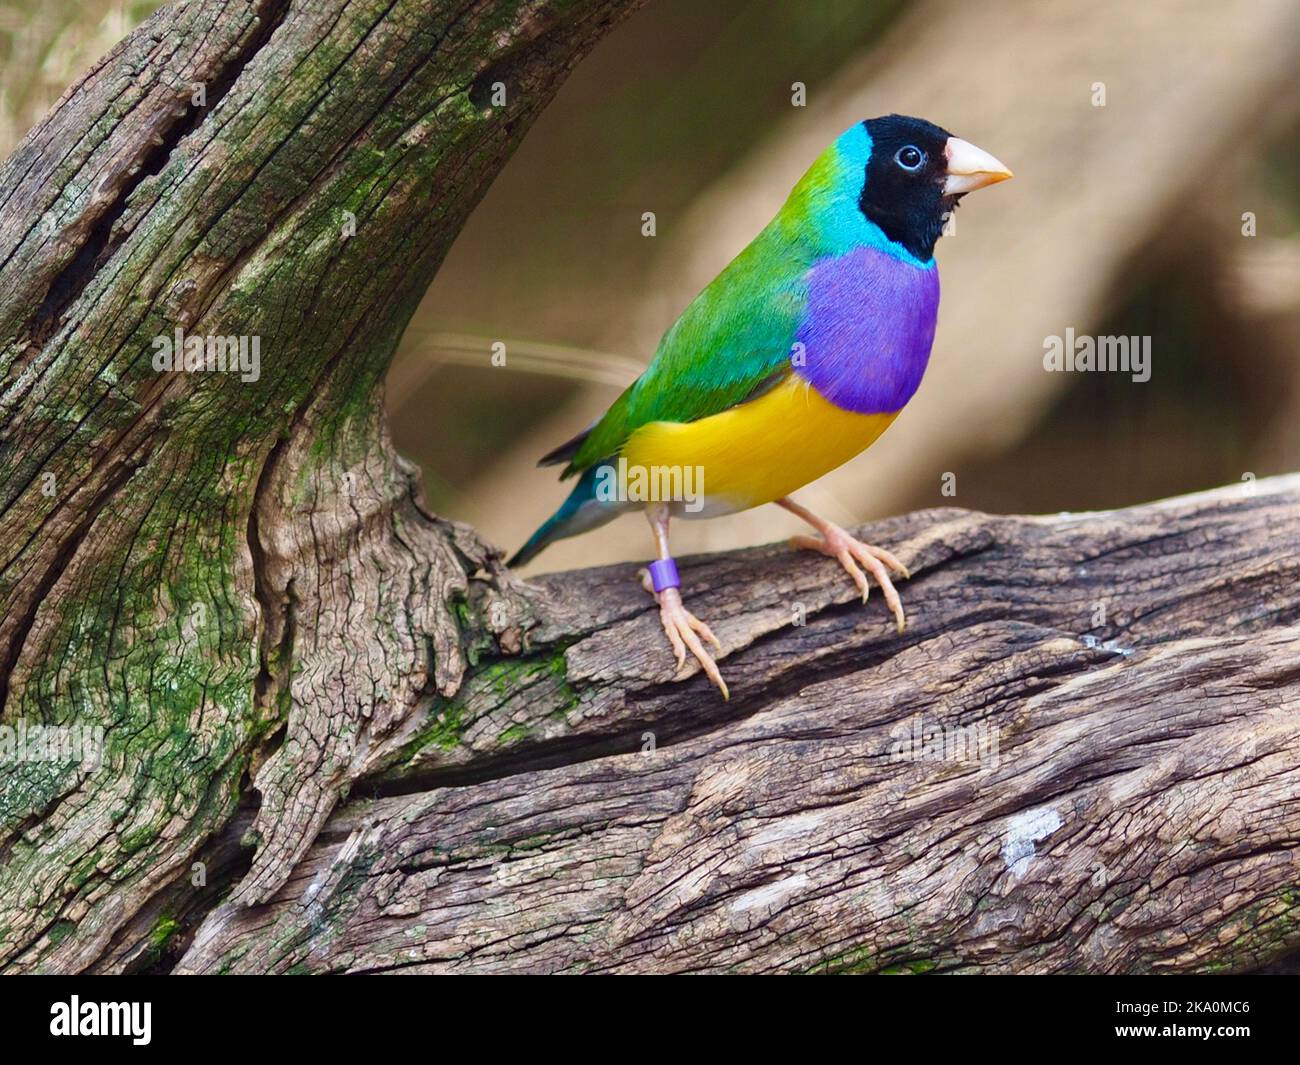 Spectacular lively male Gouldian Finch with brilliant multicolored plumage. Stock Photo